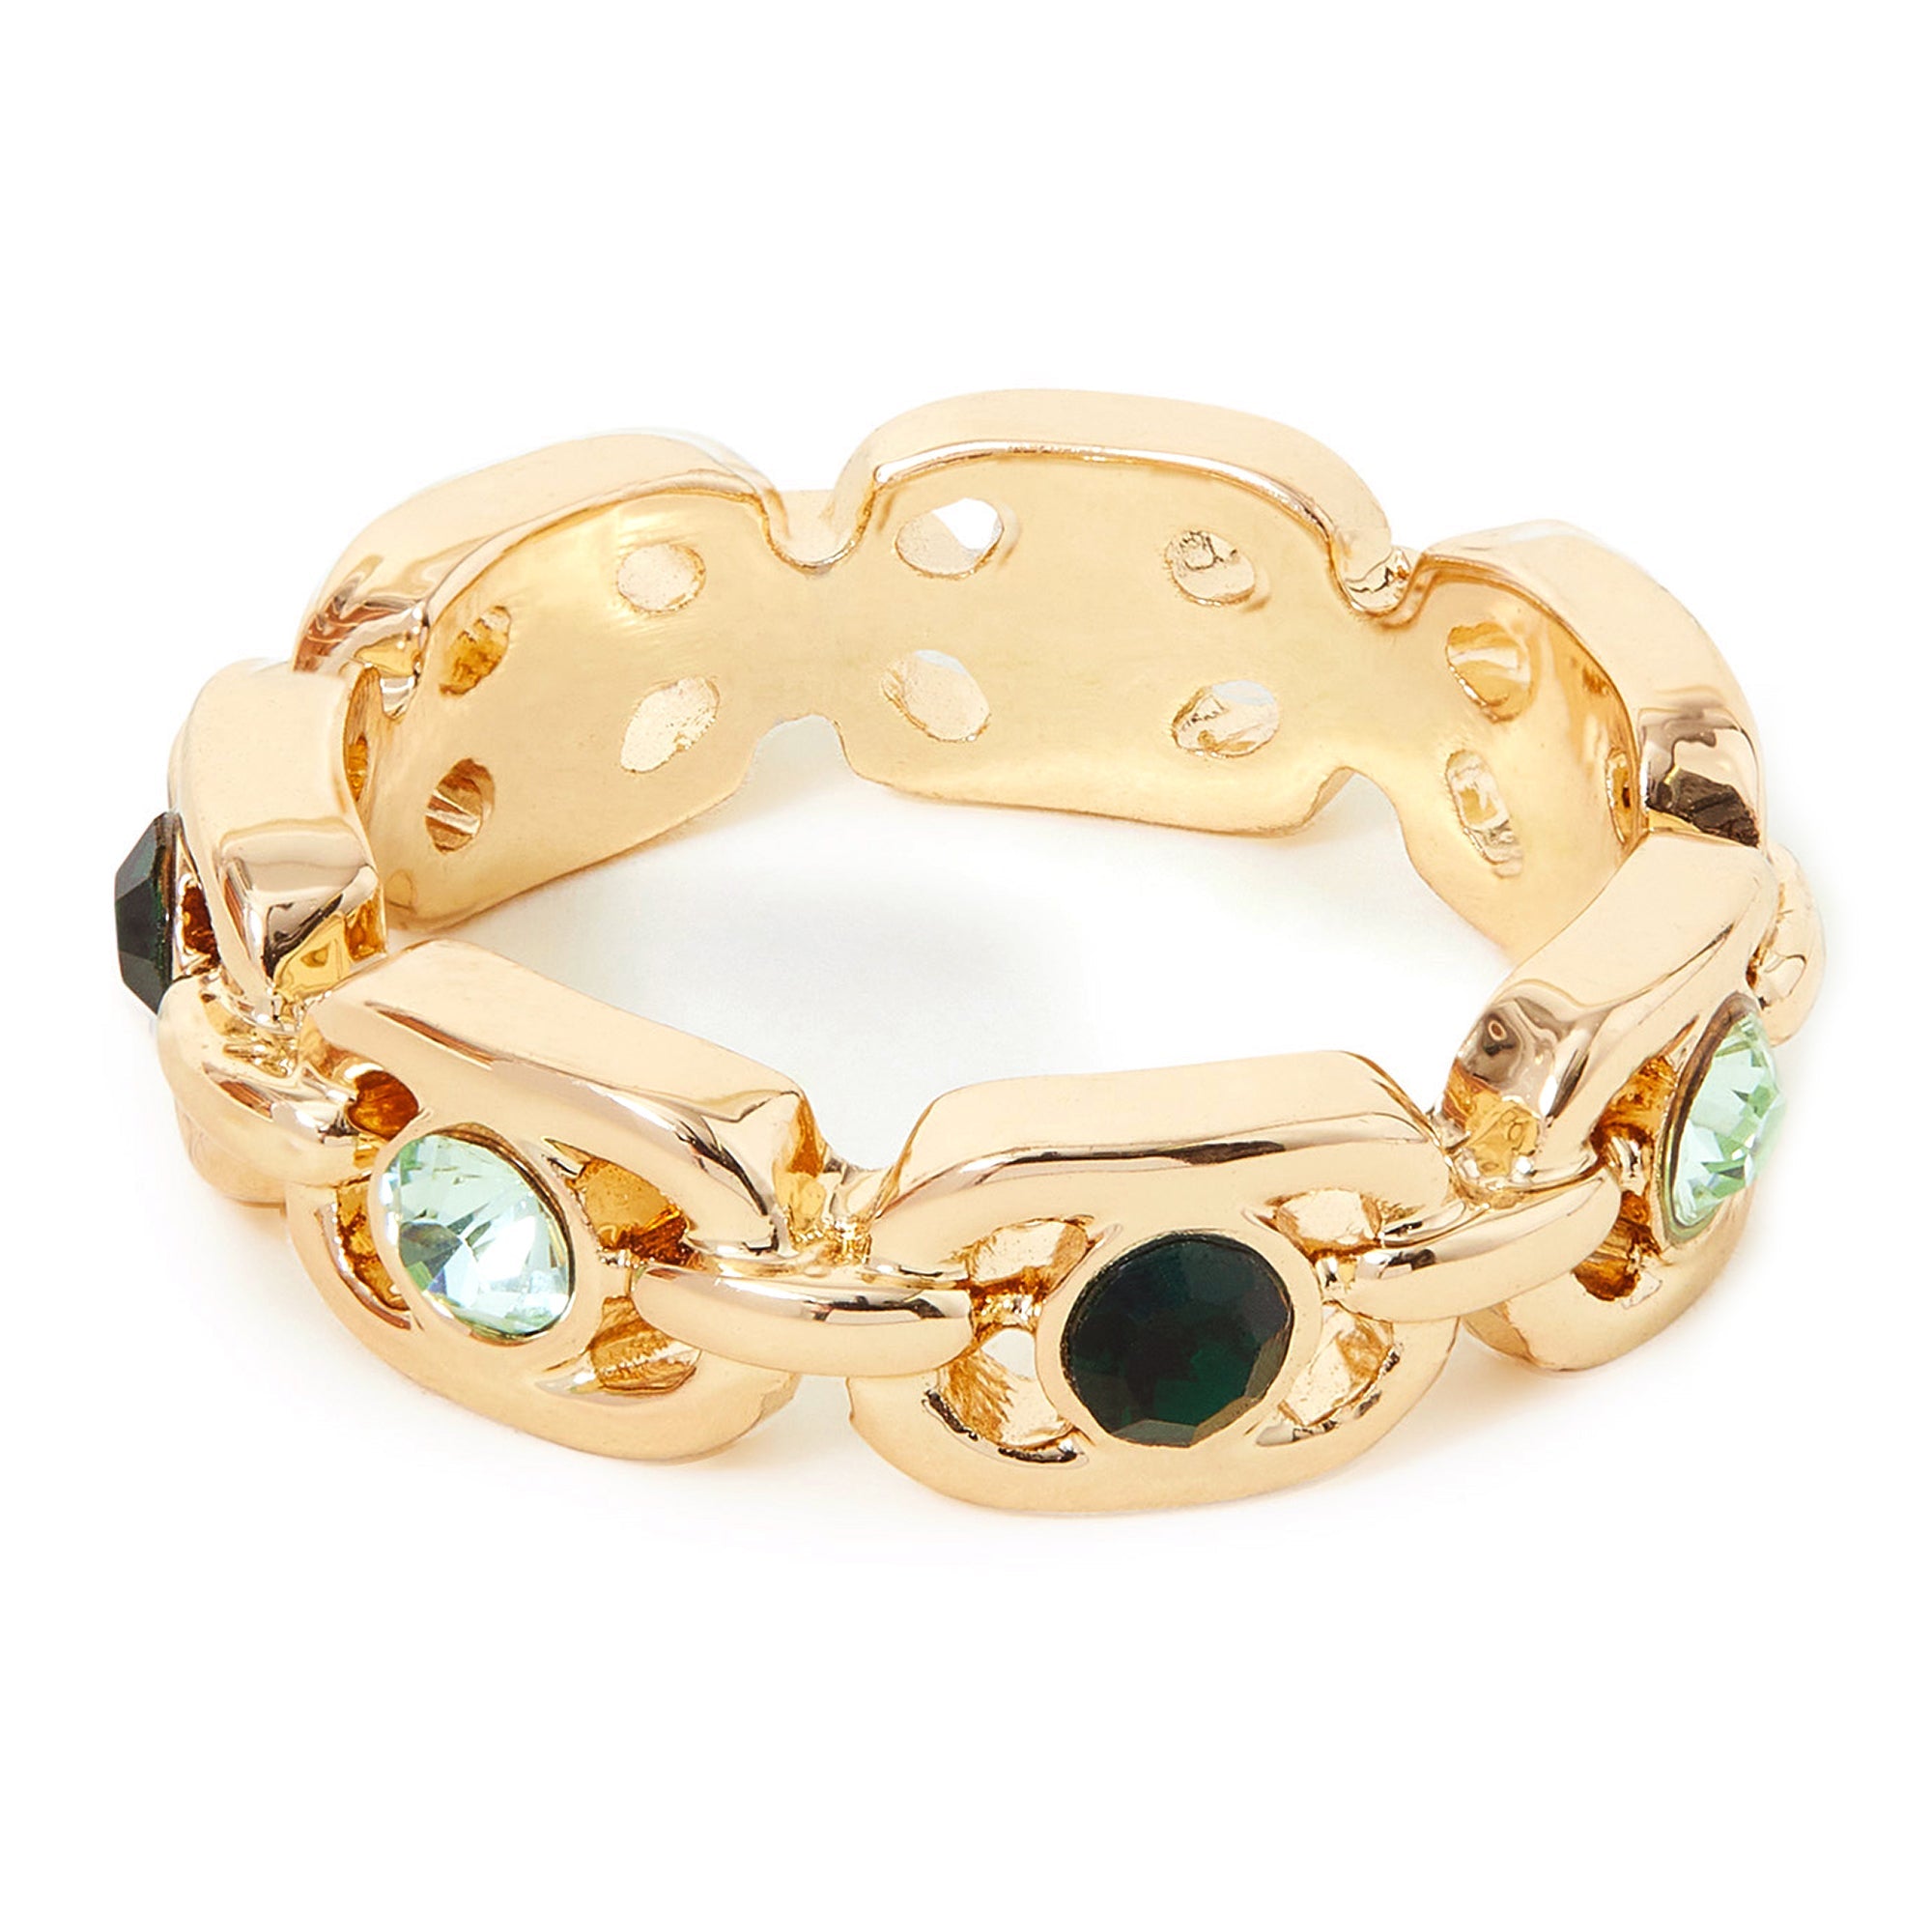 Women's Large Green Chain Gem Ring Features